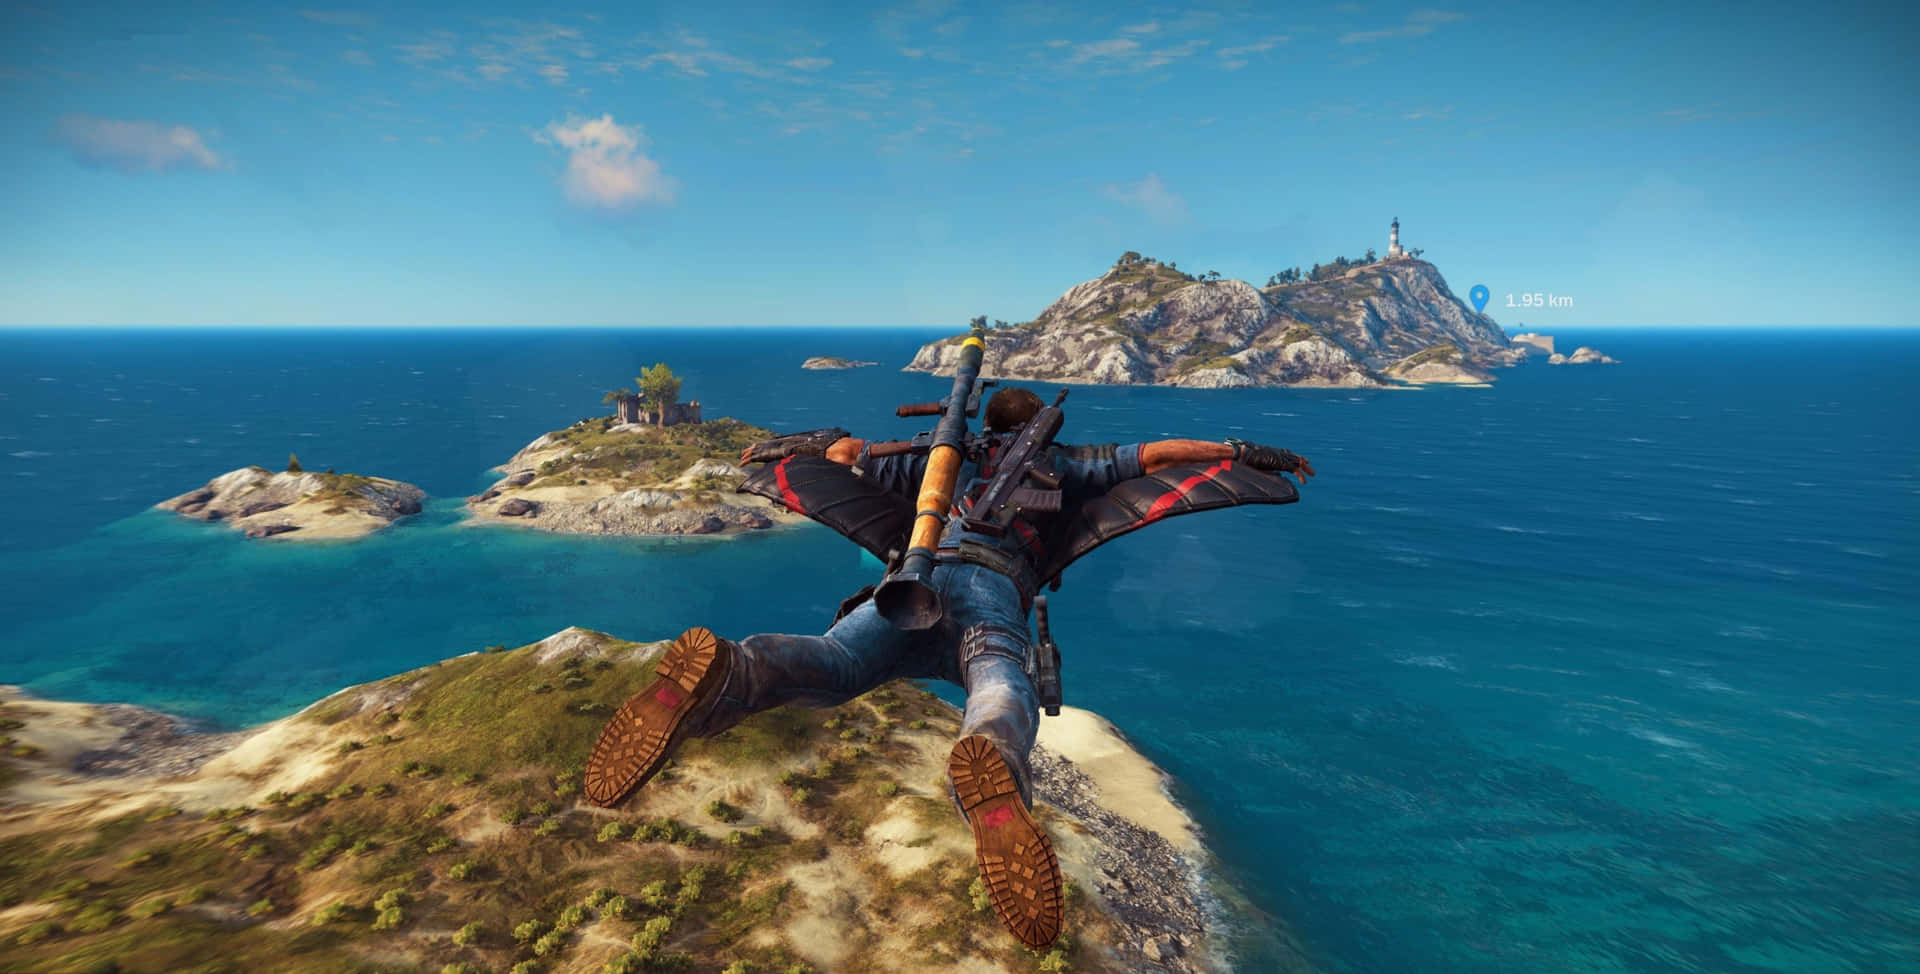 A Man Is Flying Over An Island In A Video Game Wallpaper